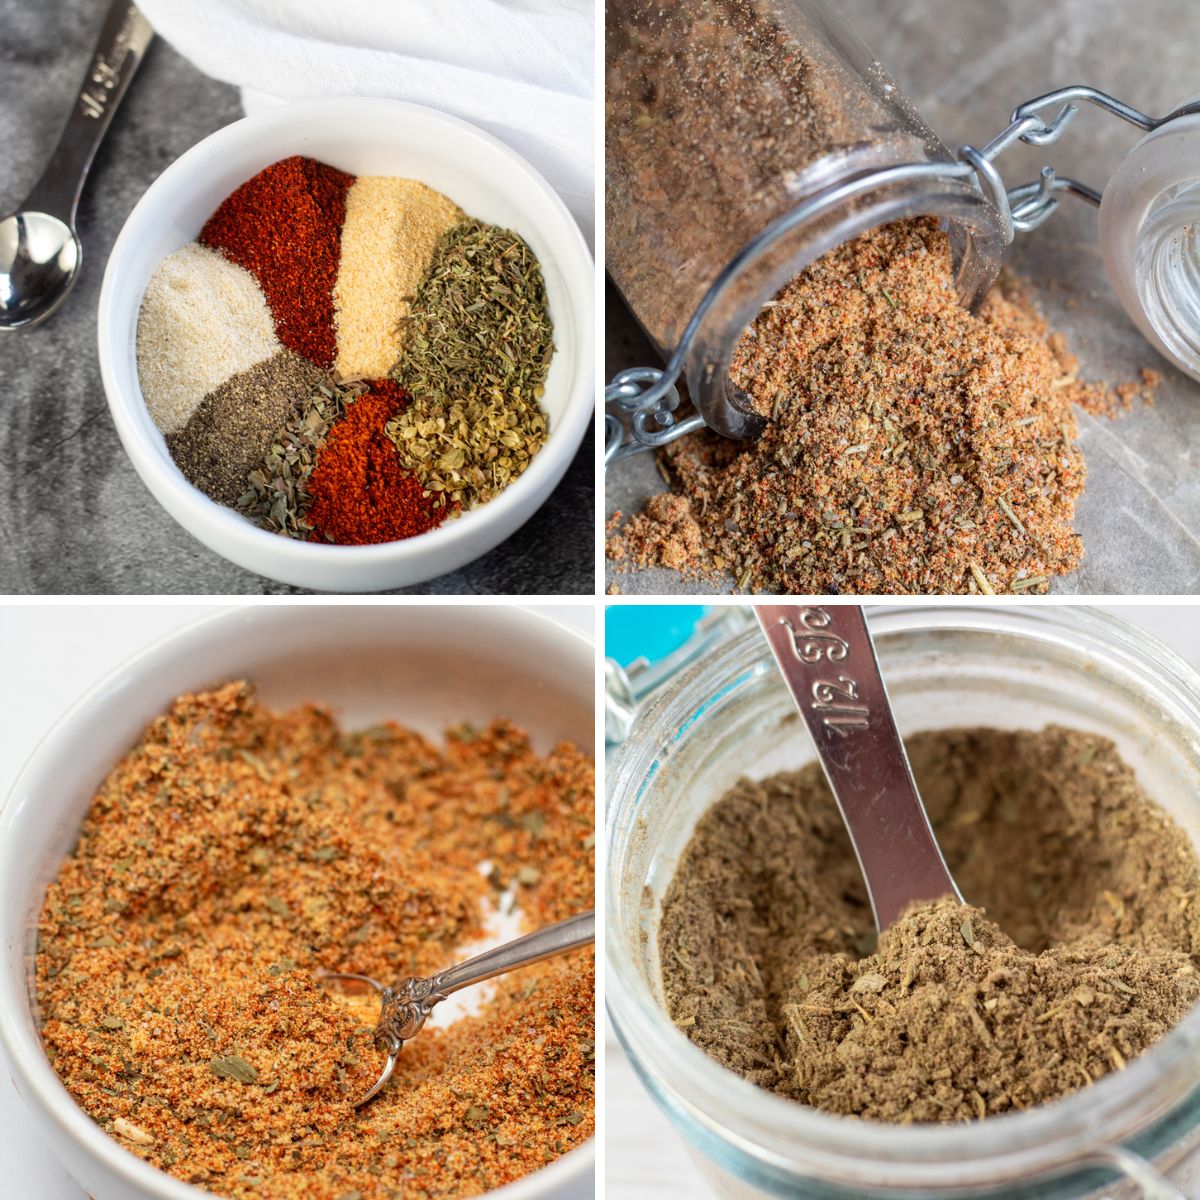 Square split image showing different seasoning mixes you can make at home.